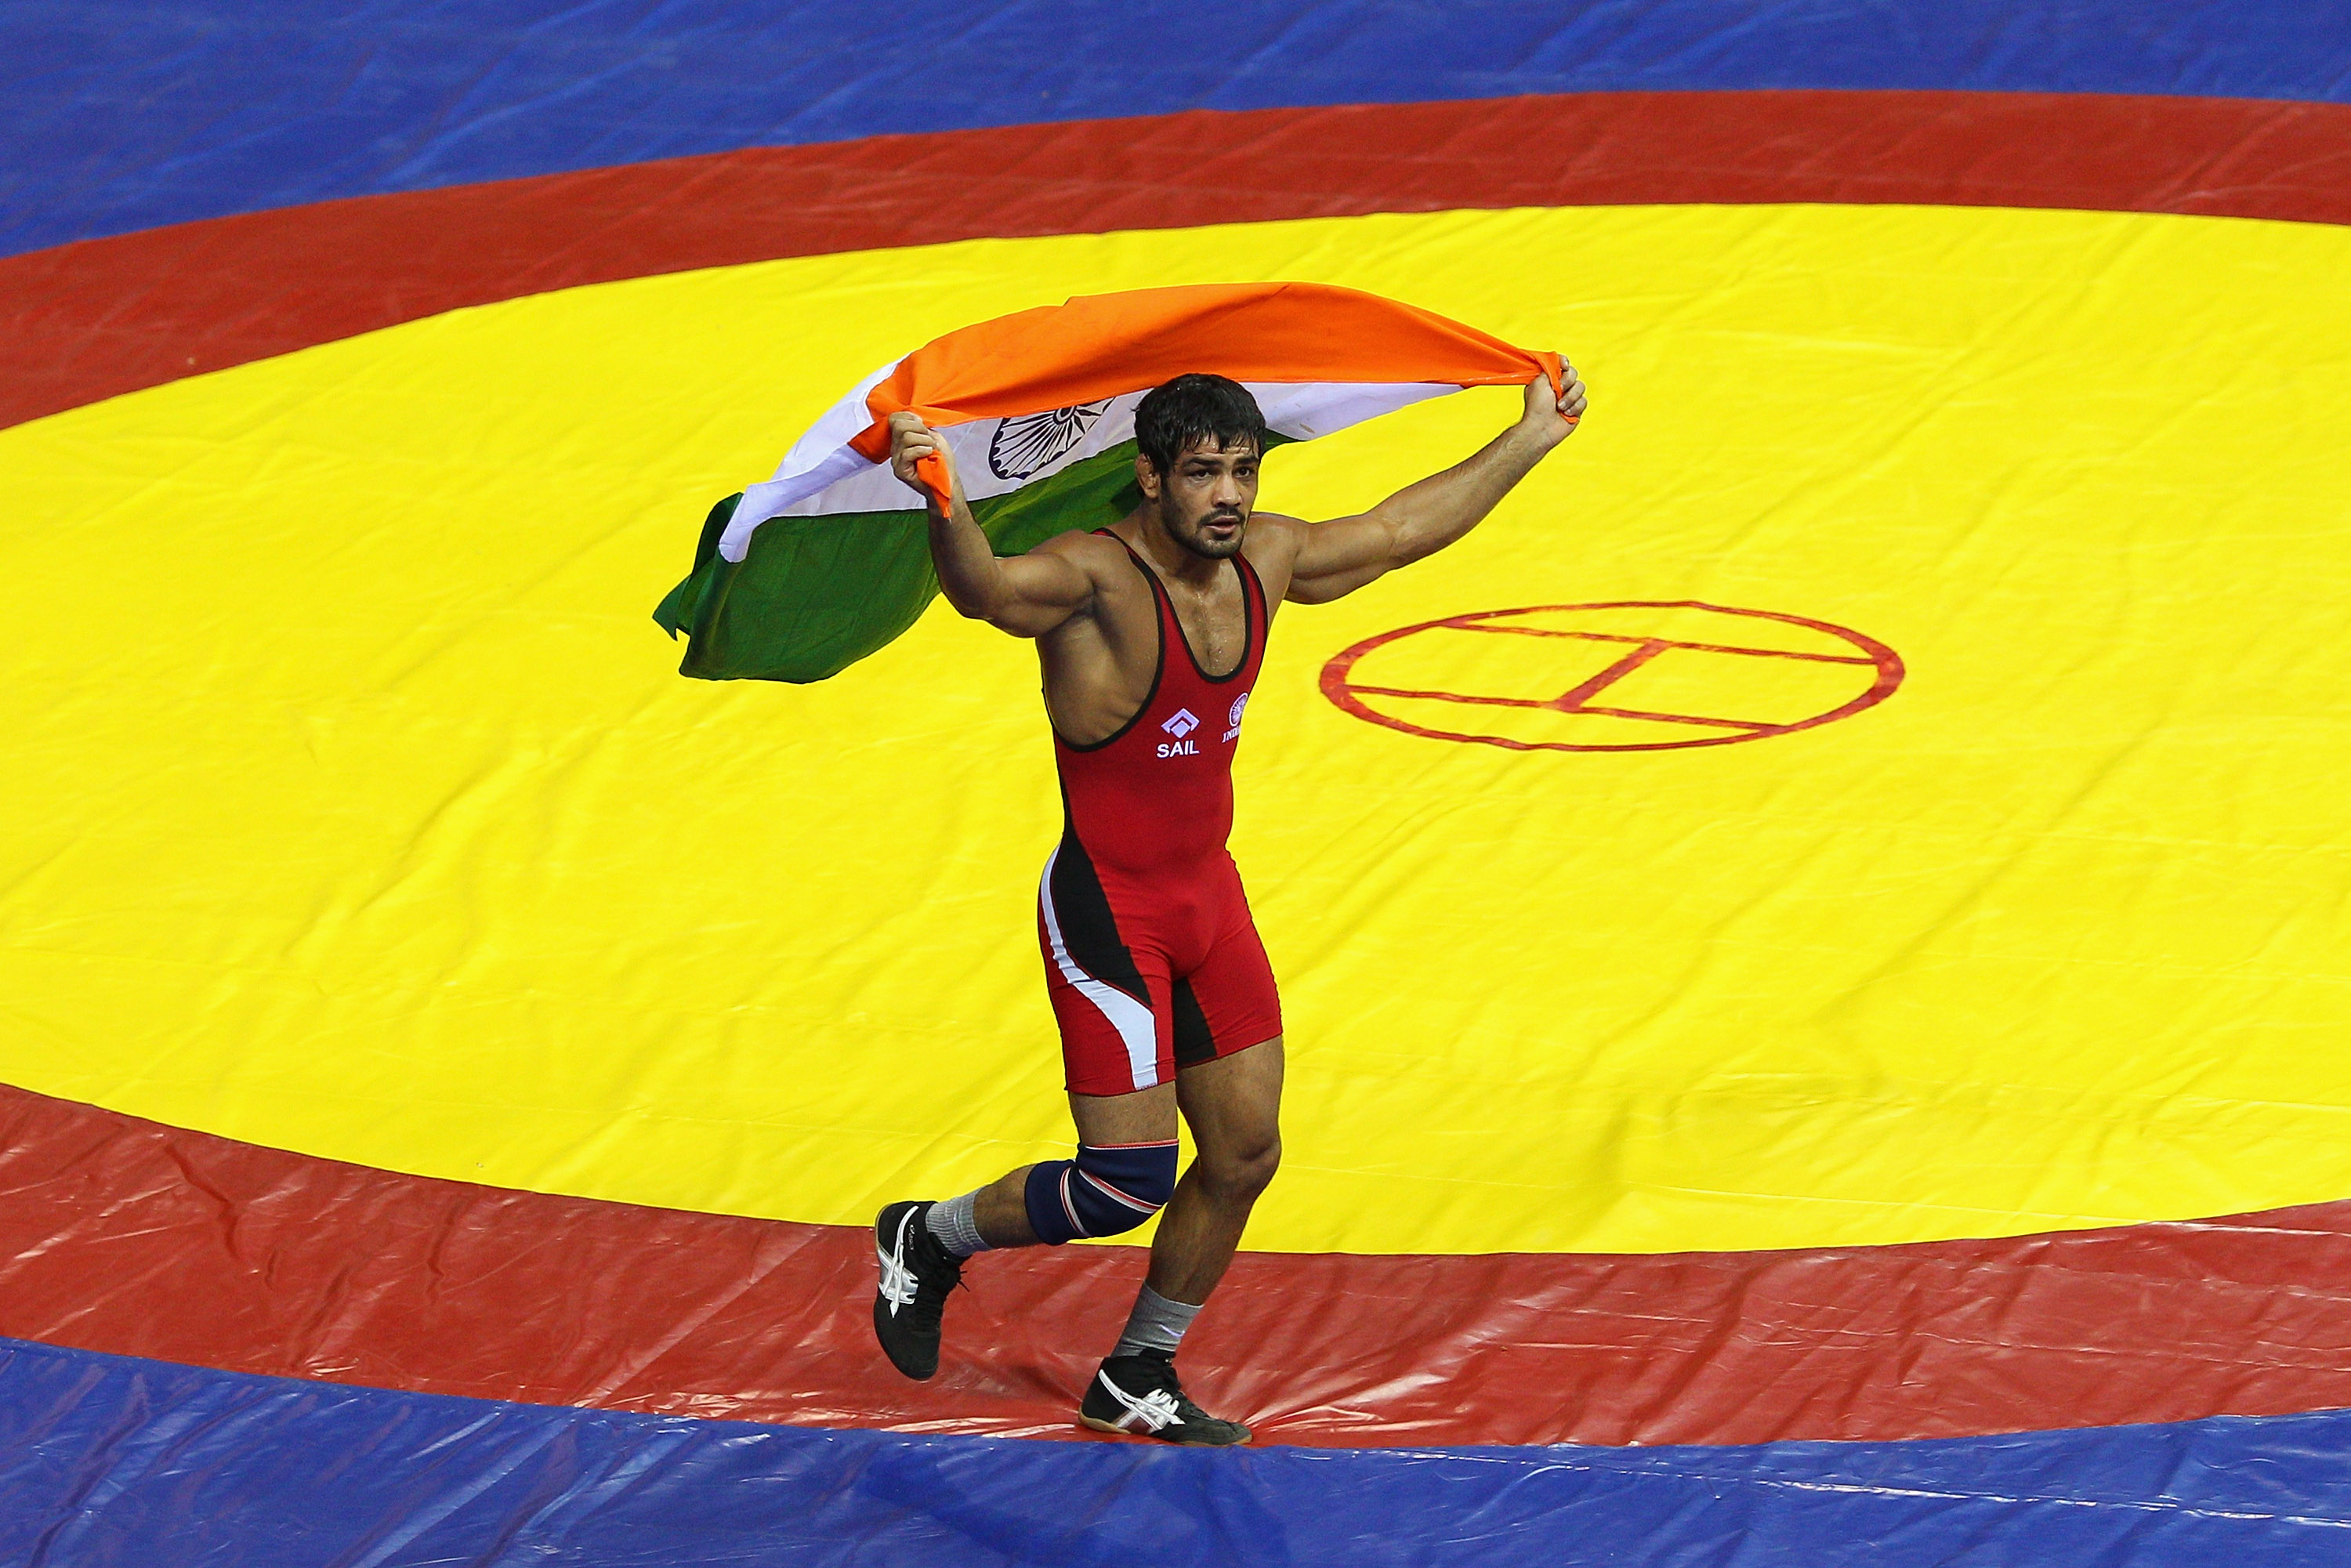 CWG 2018: Indian wrestler Sushil kumar’s name not included in the 74 kg entry list